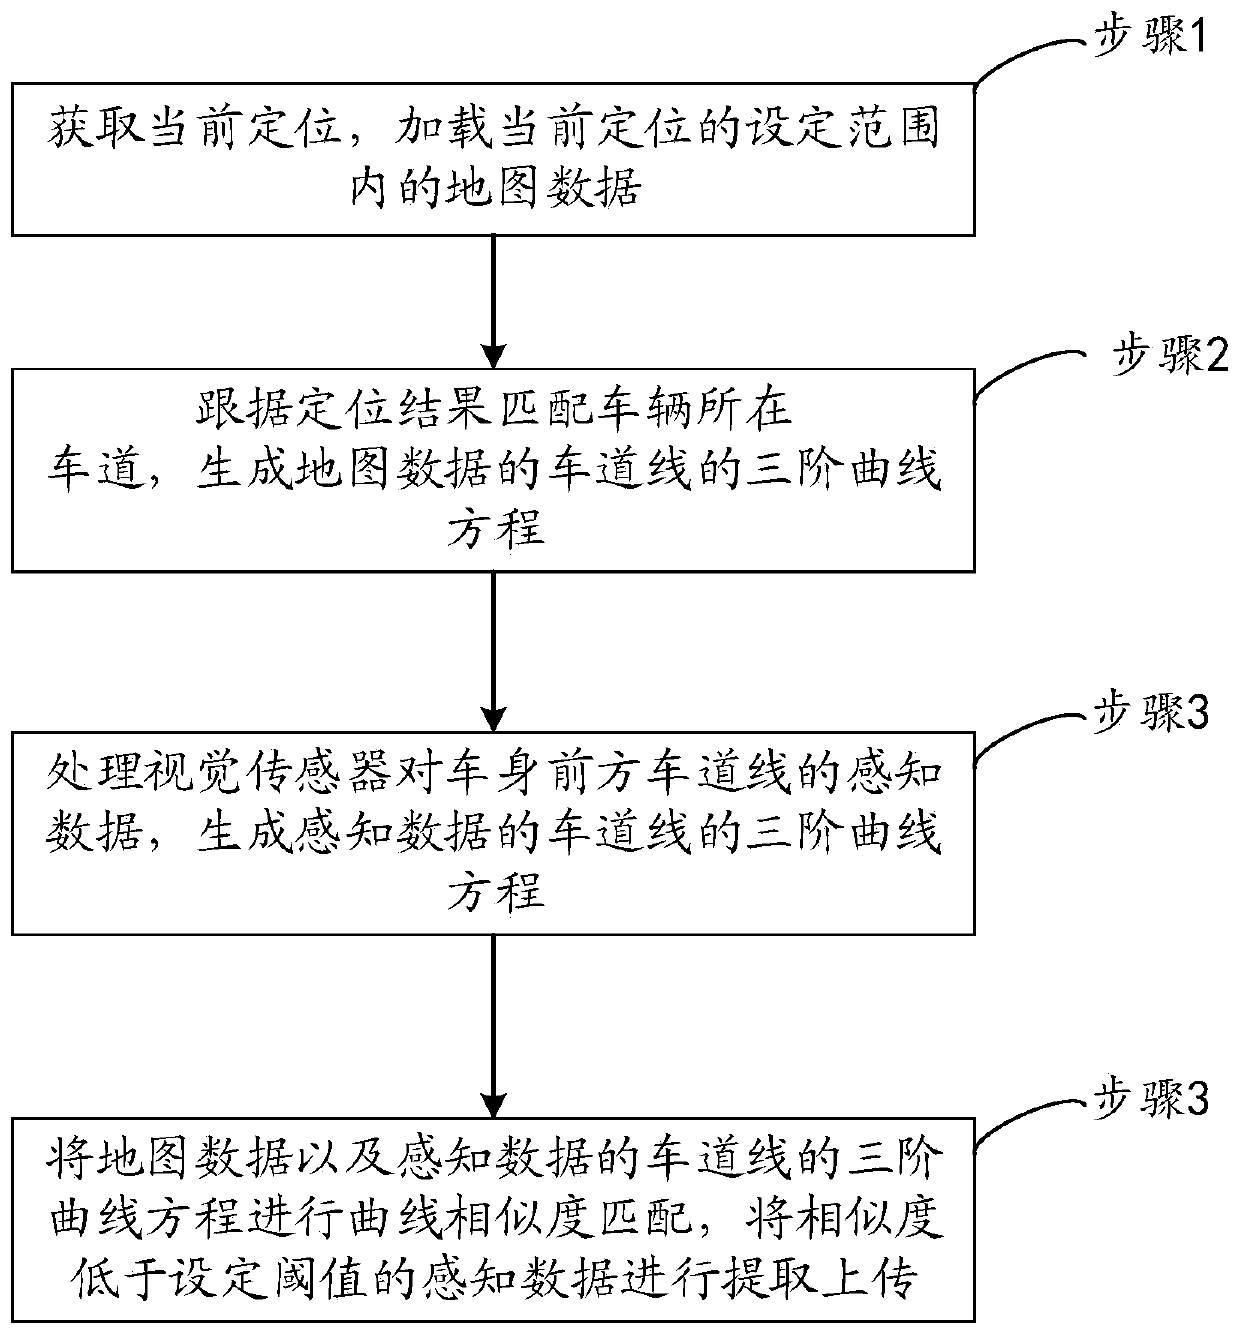 Sensing data extraction method and system